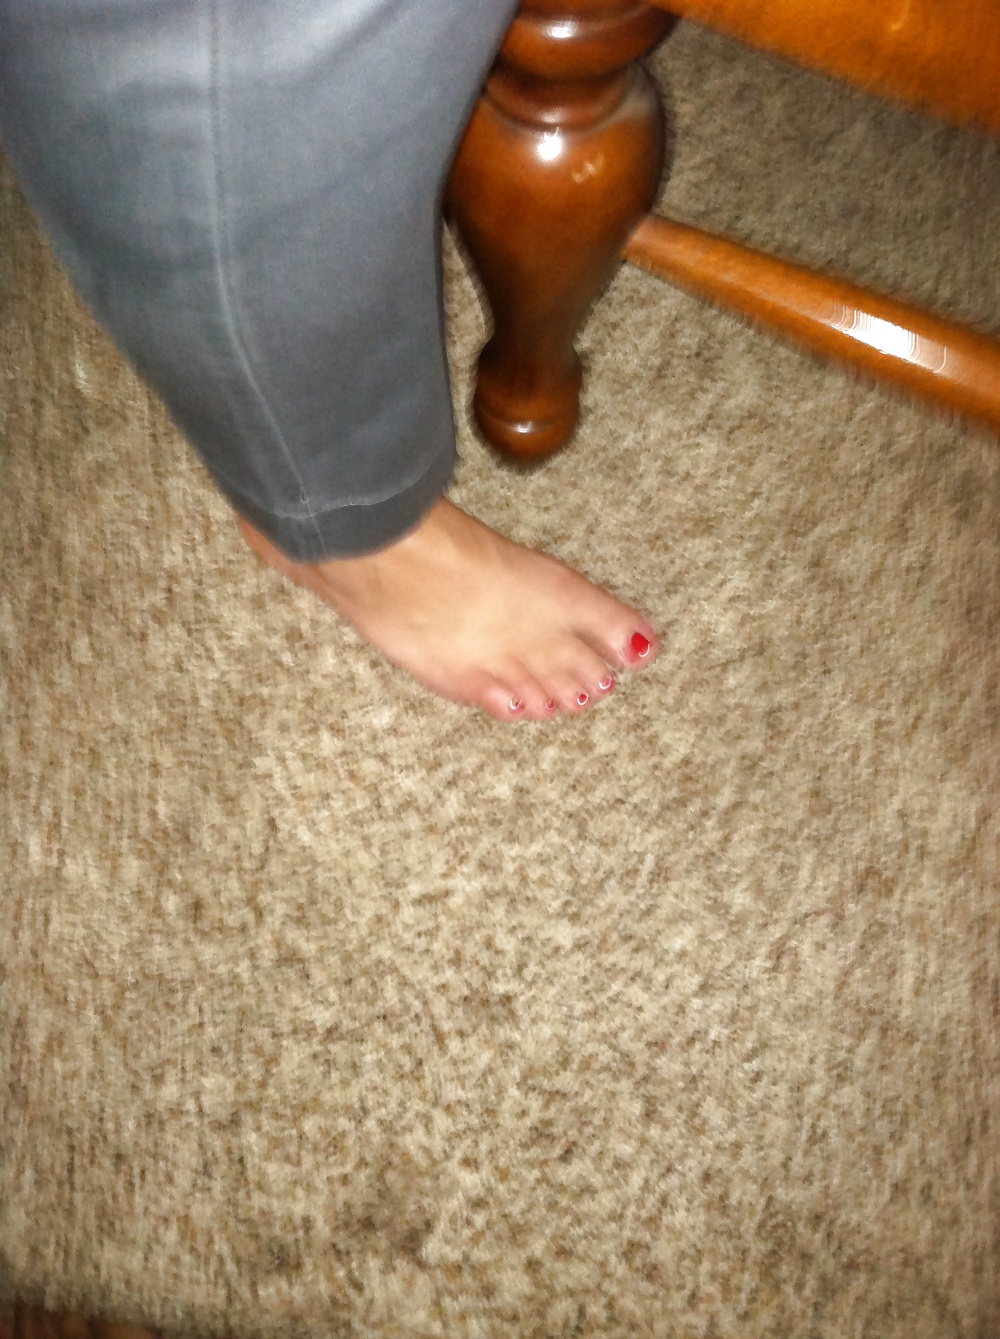 In laws sexy feet